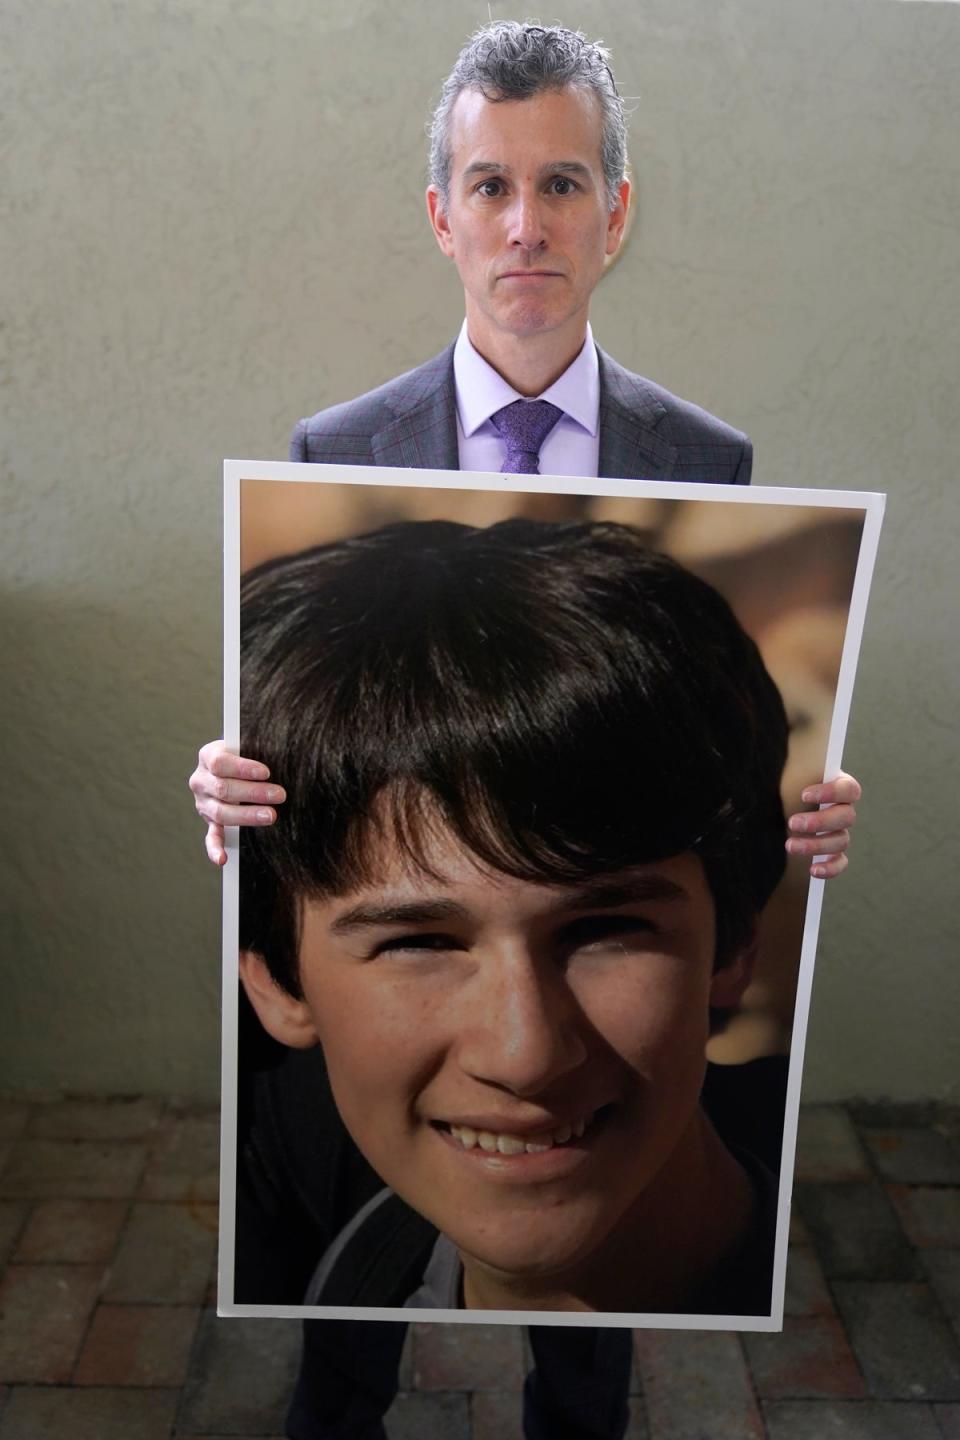 Max Schachter holds a photo of his son, Alex, during an interview, Monday, Jan. 30, 2023 (Copyright 2023 The Associated Press. All rights reserved)